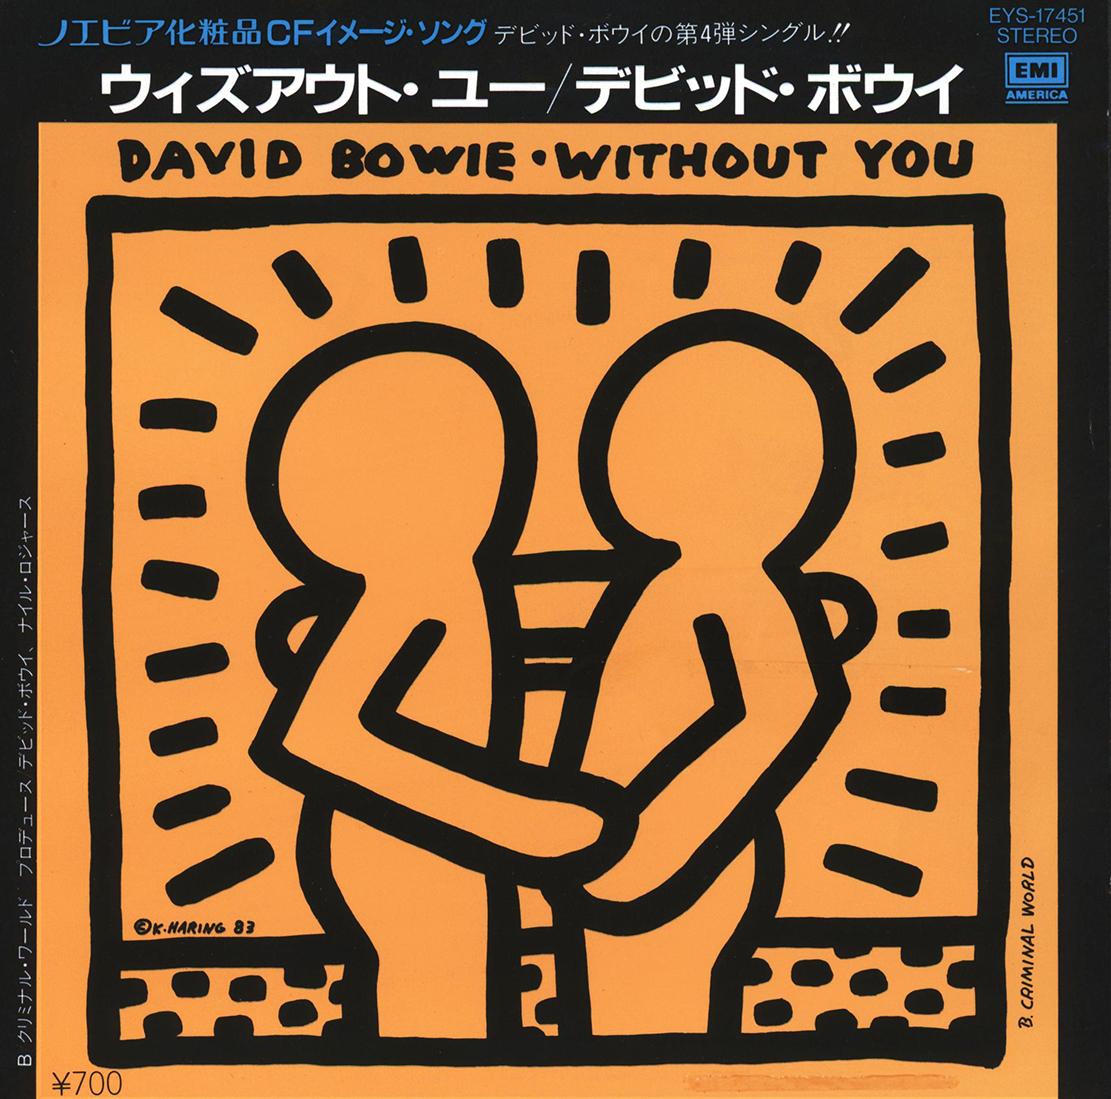 Keith Haring record art 1983:
David BOWIE "Without You" A Rare Highly Sought After Vinyl Art Cover featuring Original Artwork by Keith Haring. Rare Japan 1st Pressing 1983 accompanied by its original record album:

Medium: Off-Set Lithograph.